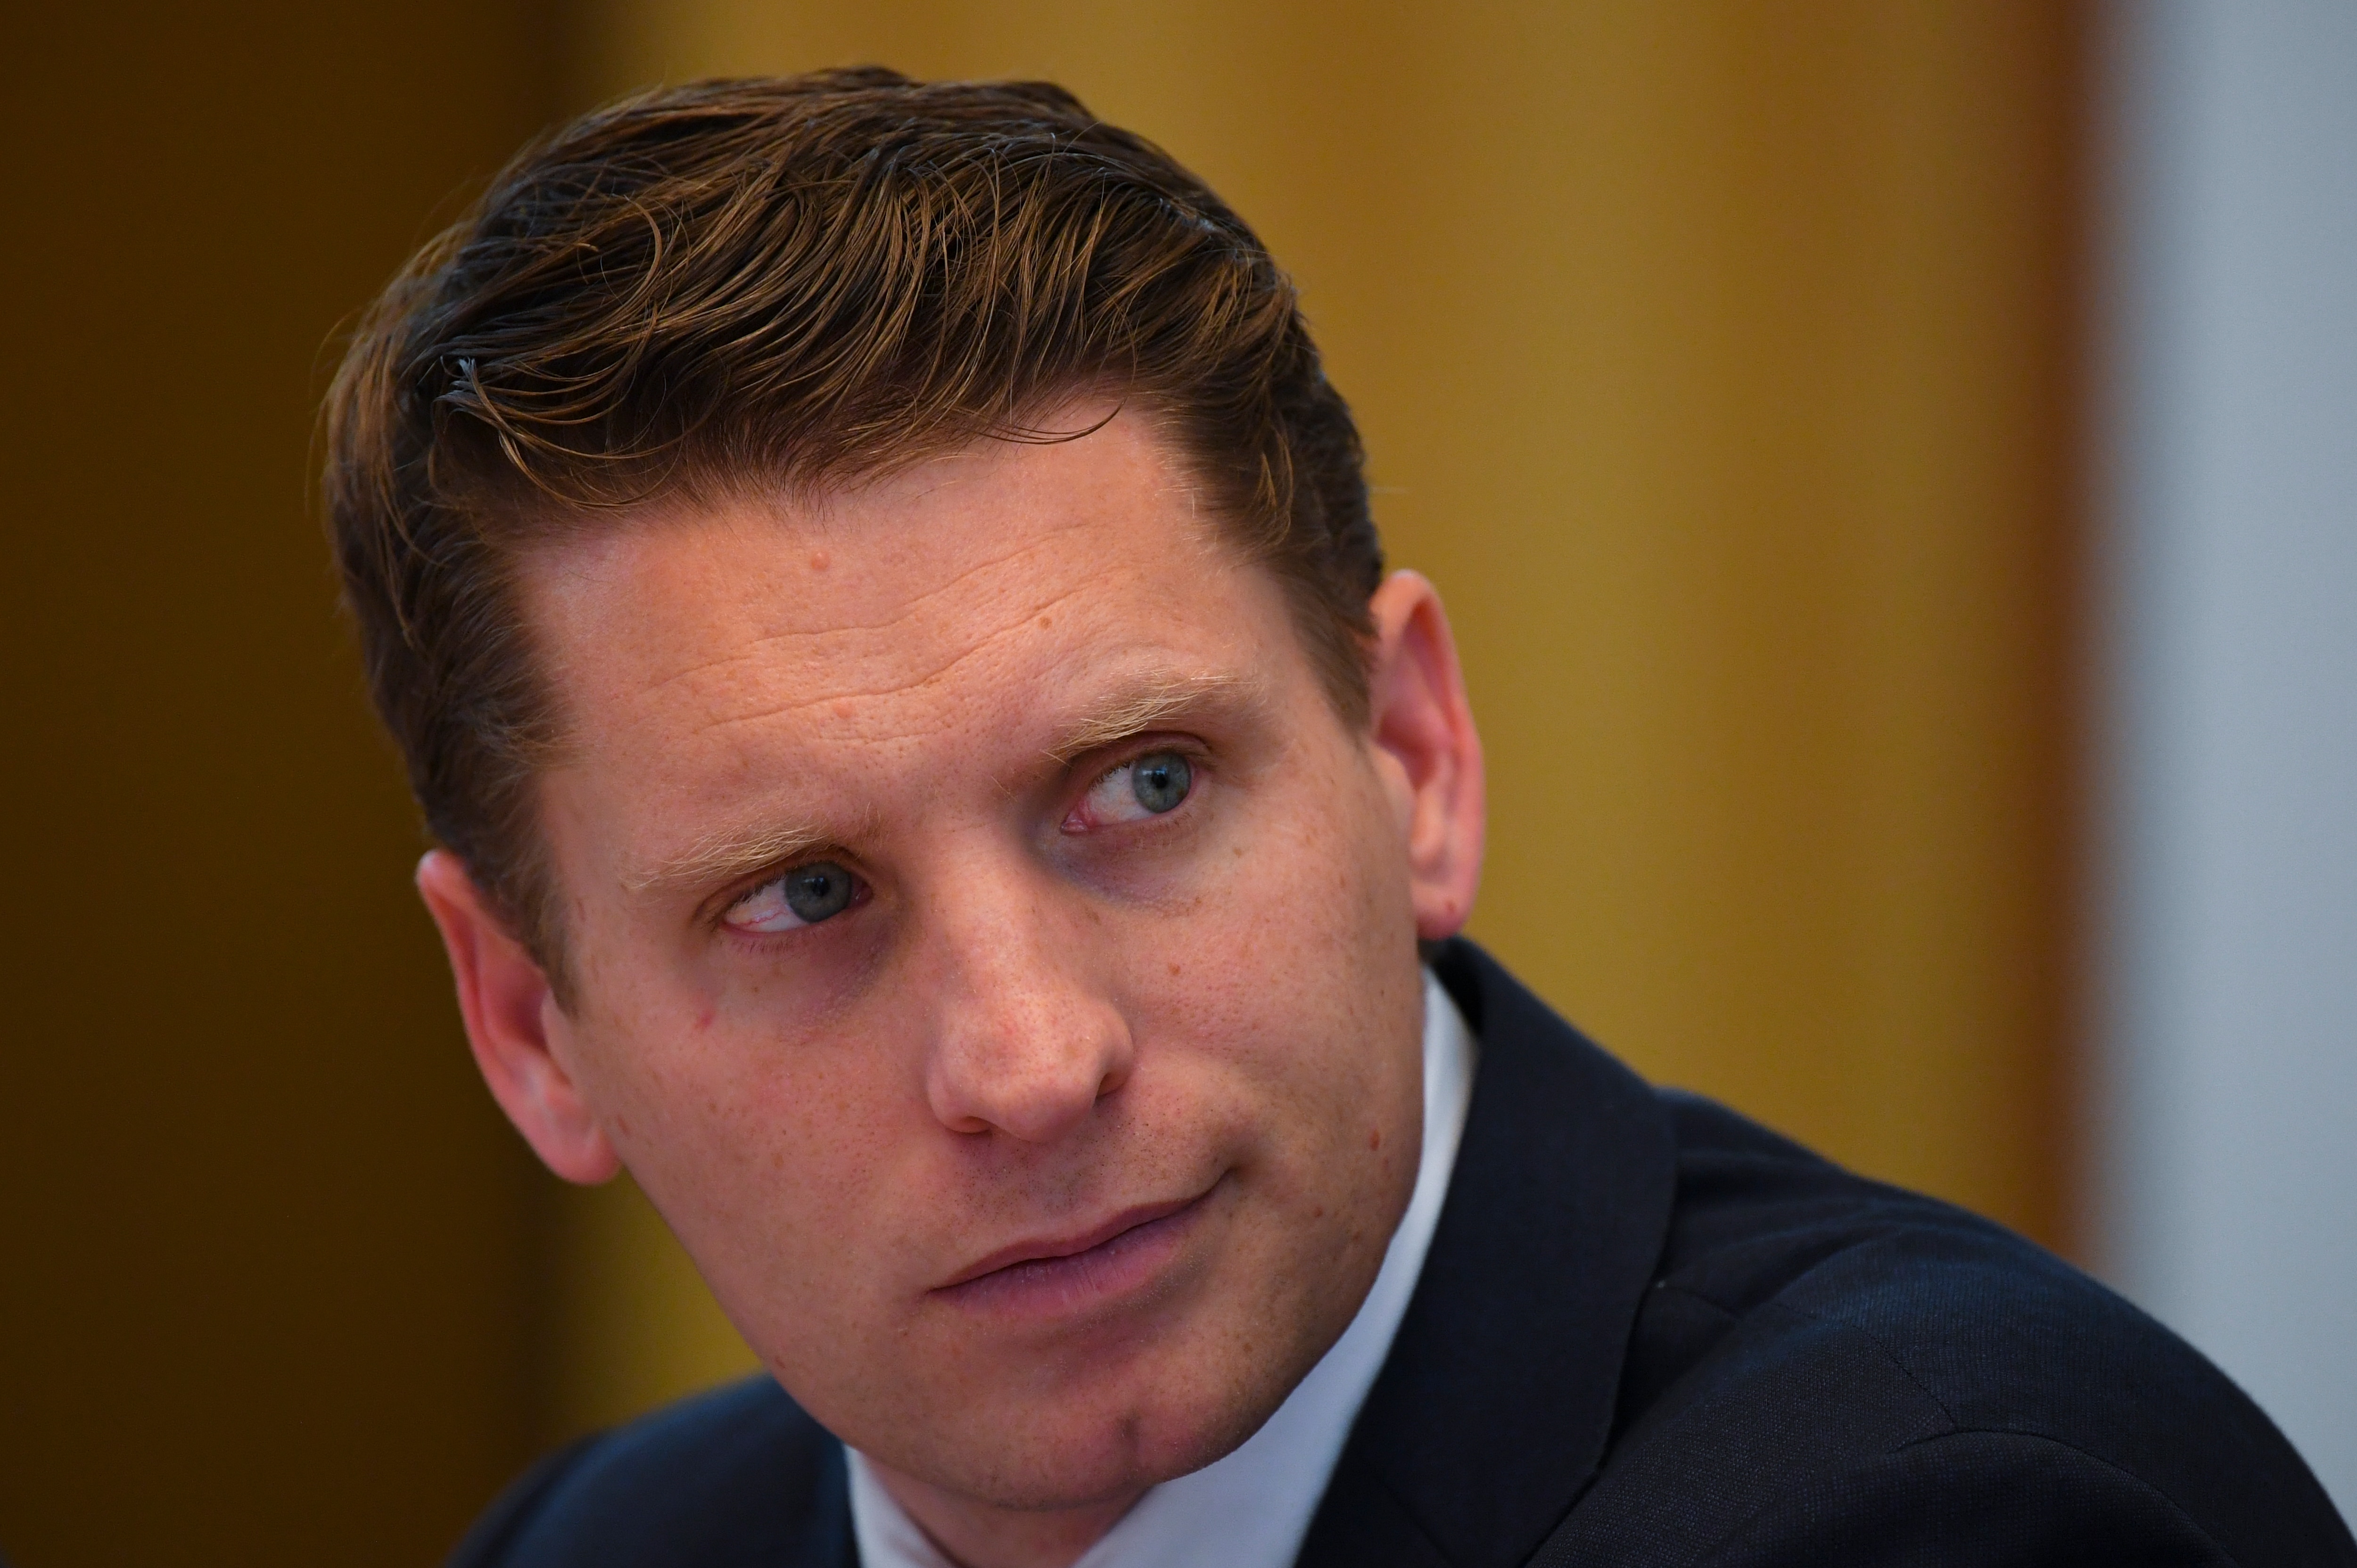 Committee chair Andrew Hastie reacts during a hearing of the Parliamentary Joint Committee on Intelligence and Security at Parliament House in Canberra.